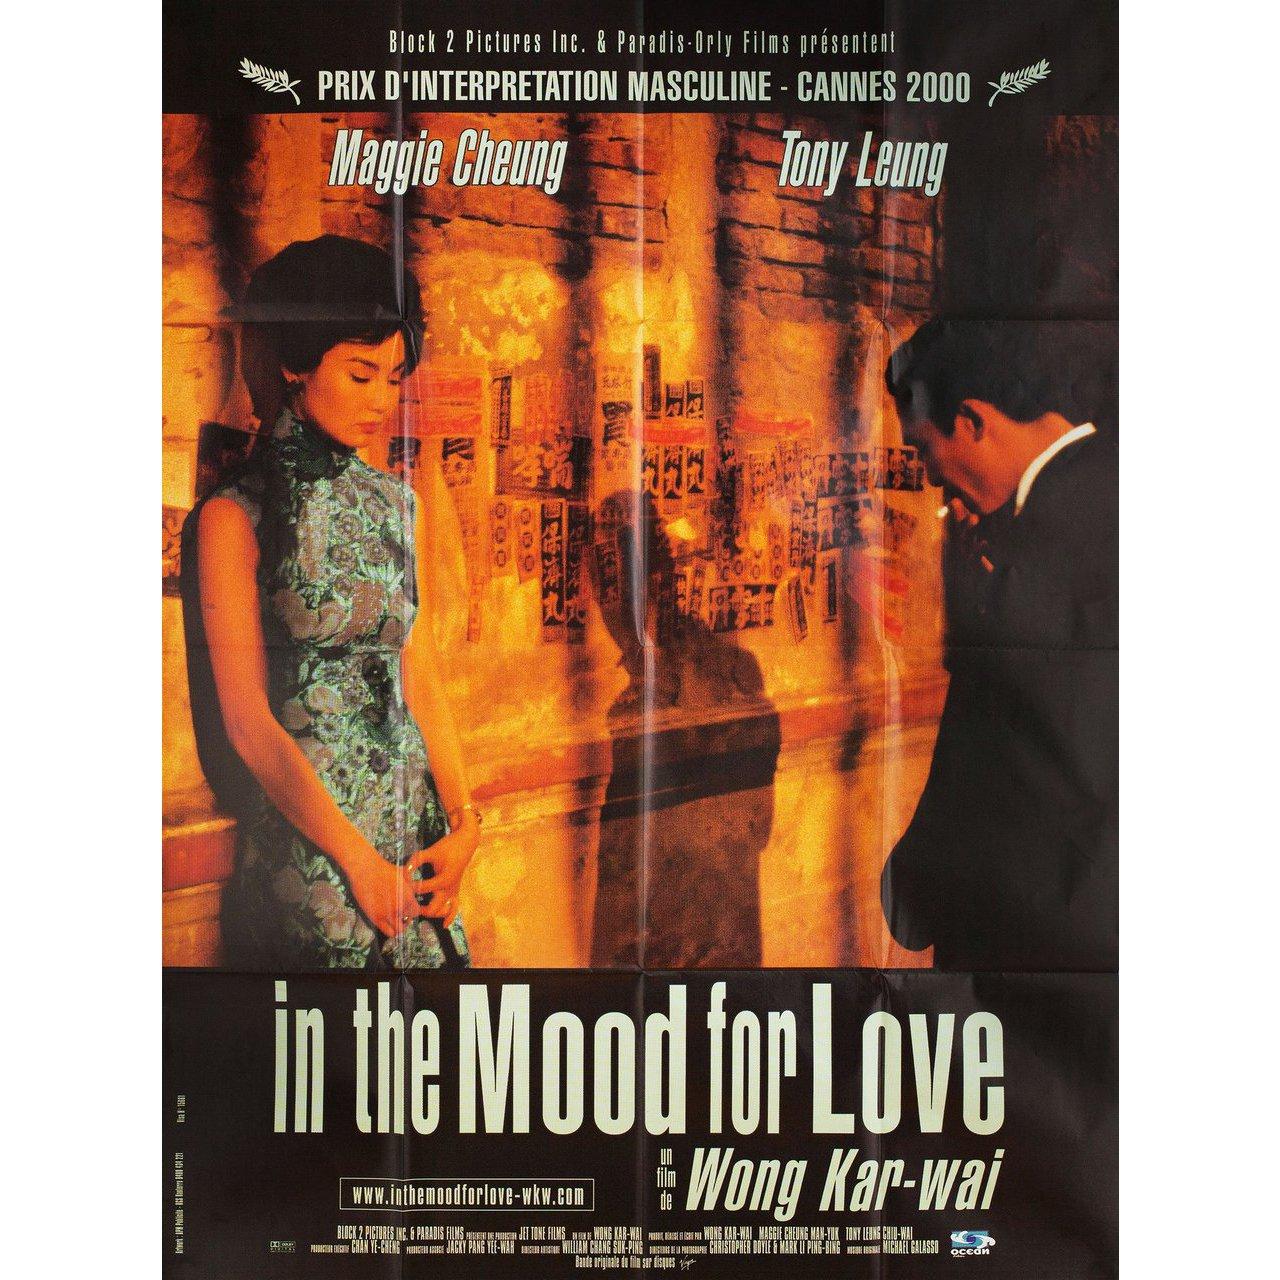 Original 2000 French grande poster for the film “In the Mood for Love” directed by Kar Wai Wong with Maggie Cheung / Tony Chiu Wai Leung / Ping Lam Siu / Tung Cho 'Joe' Cheung. Fine condition, folded. Many original posters were issued folded or were